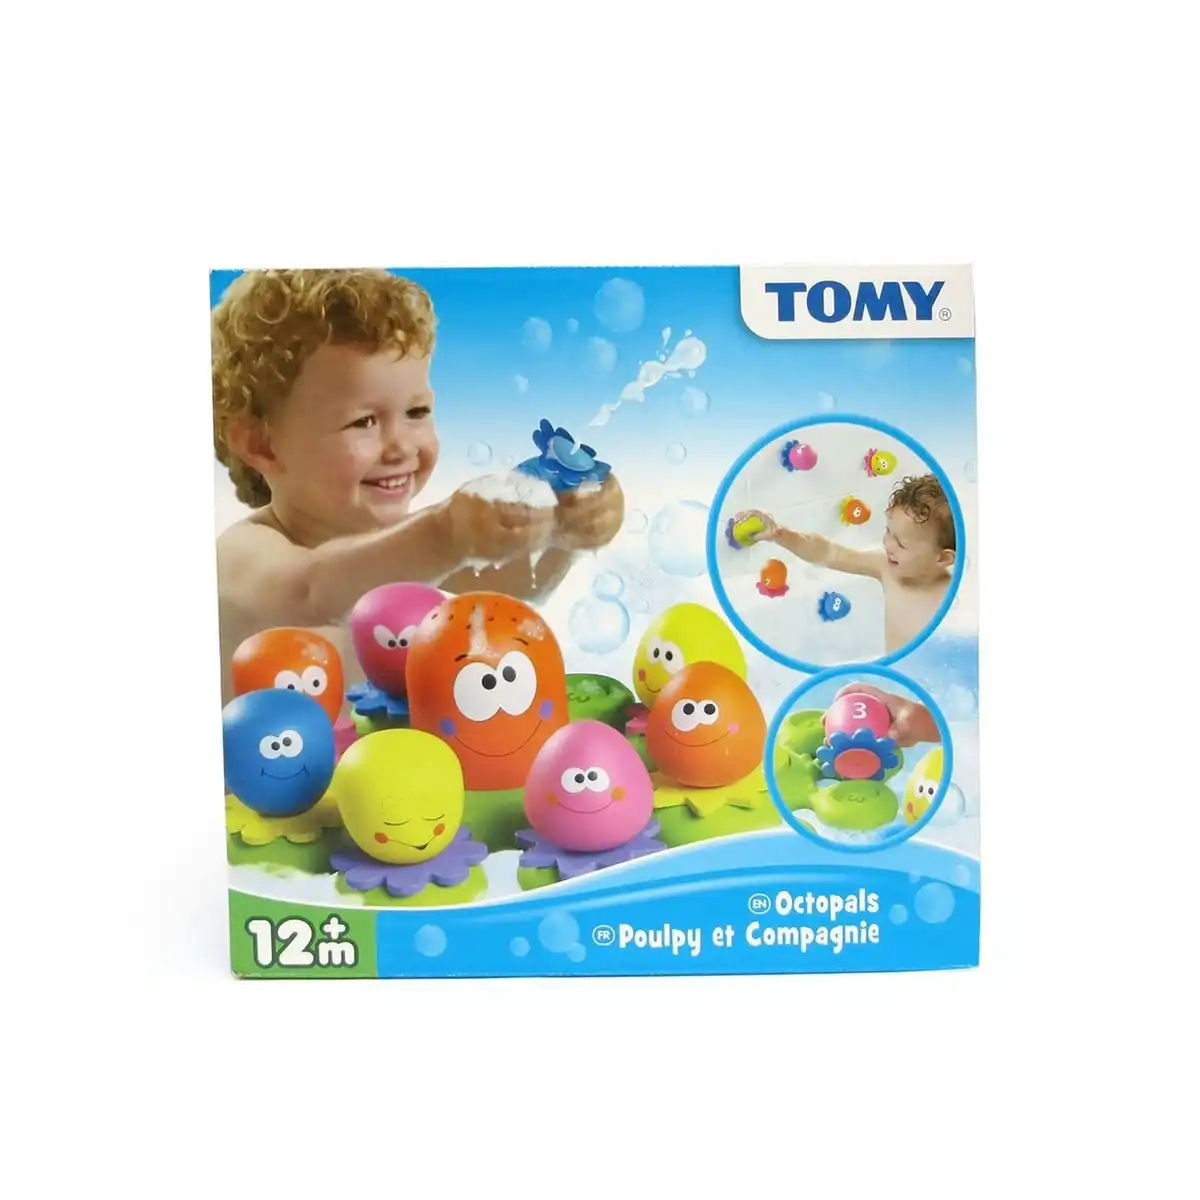 Toomies - TOMY Octopals Counter Squiters